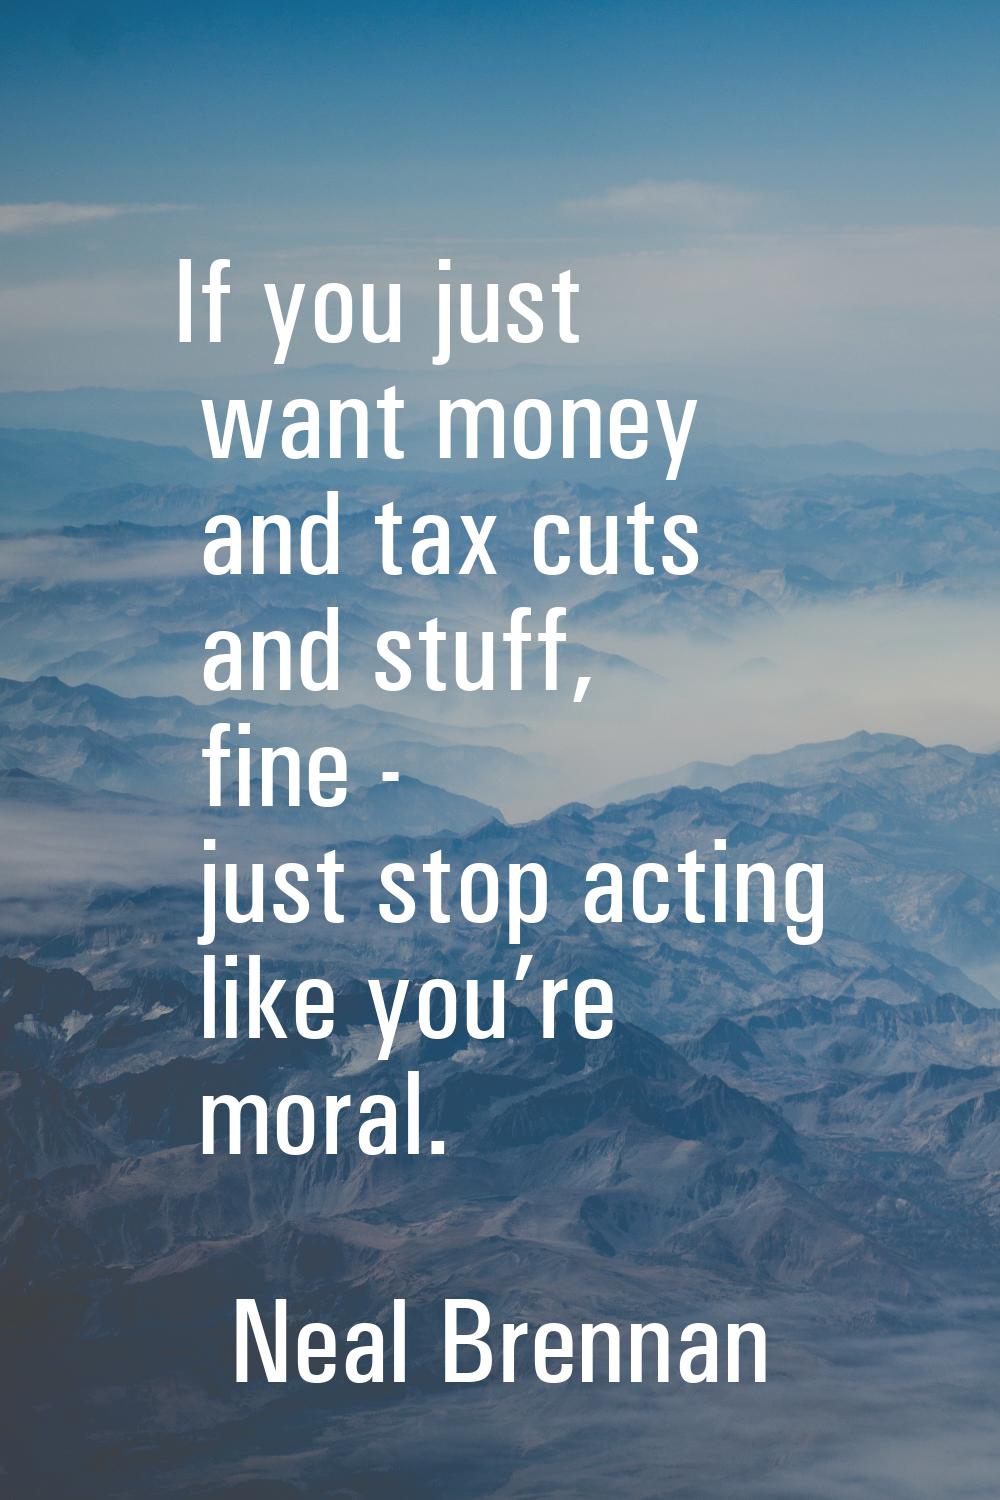 If you just want money and tax cuts and stuff, fine - just stop acting like you’re moral.